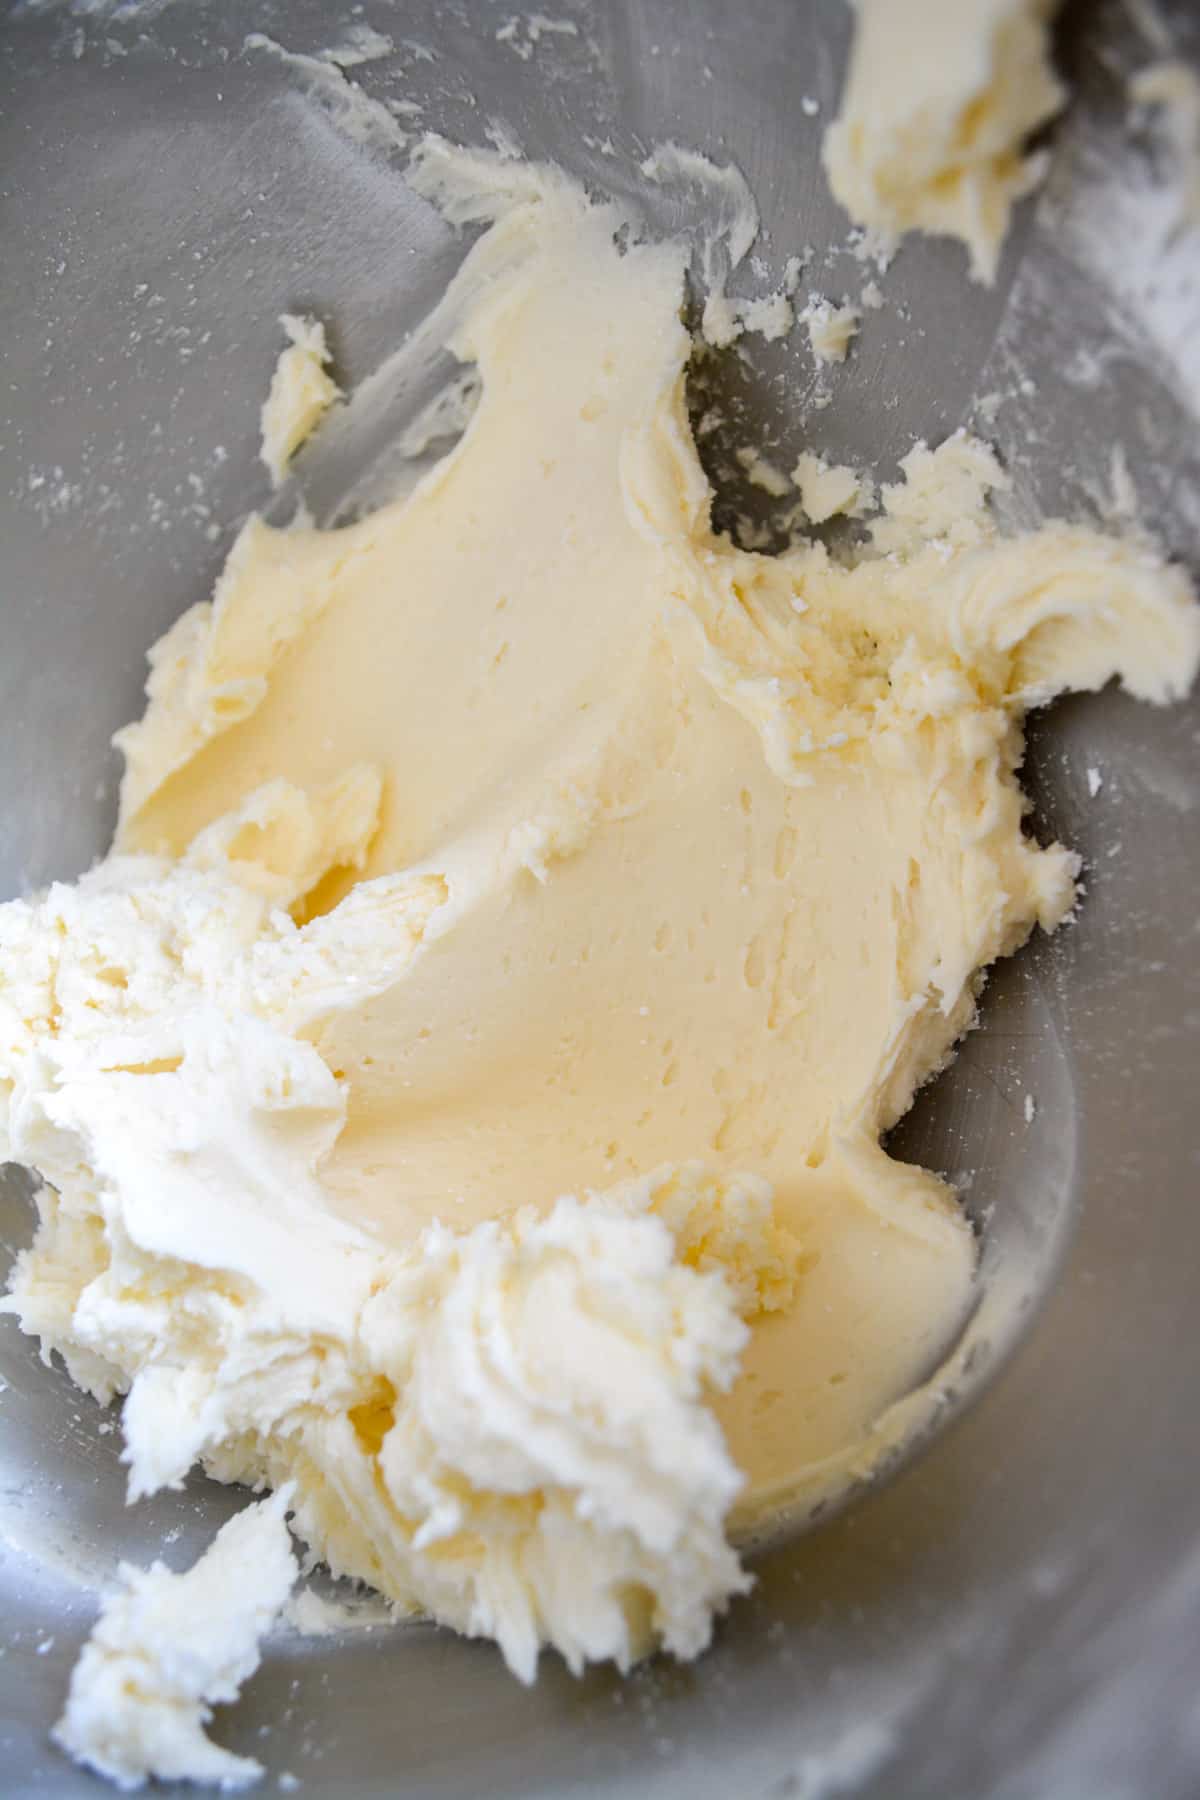 Mixing dairy-free buttercream frosting in a metal bowl.